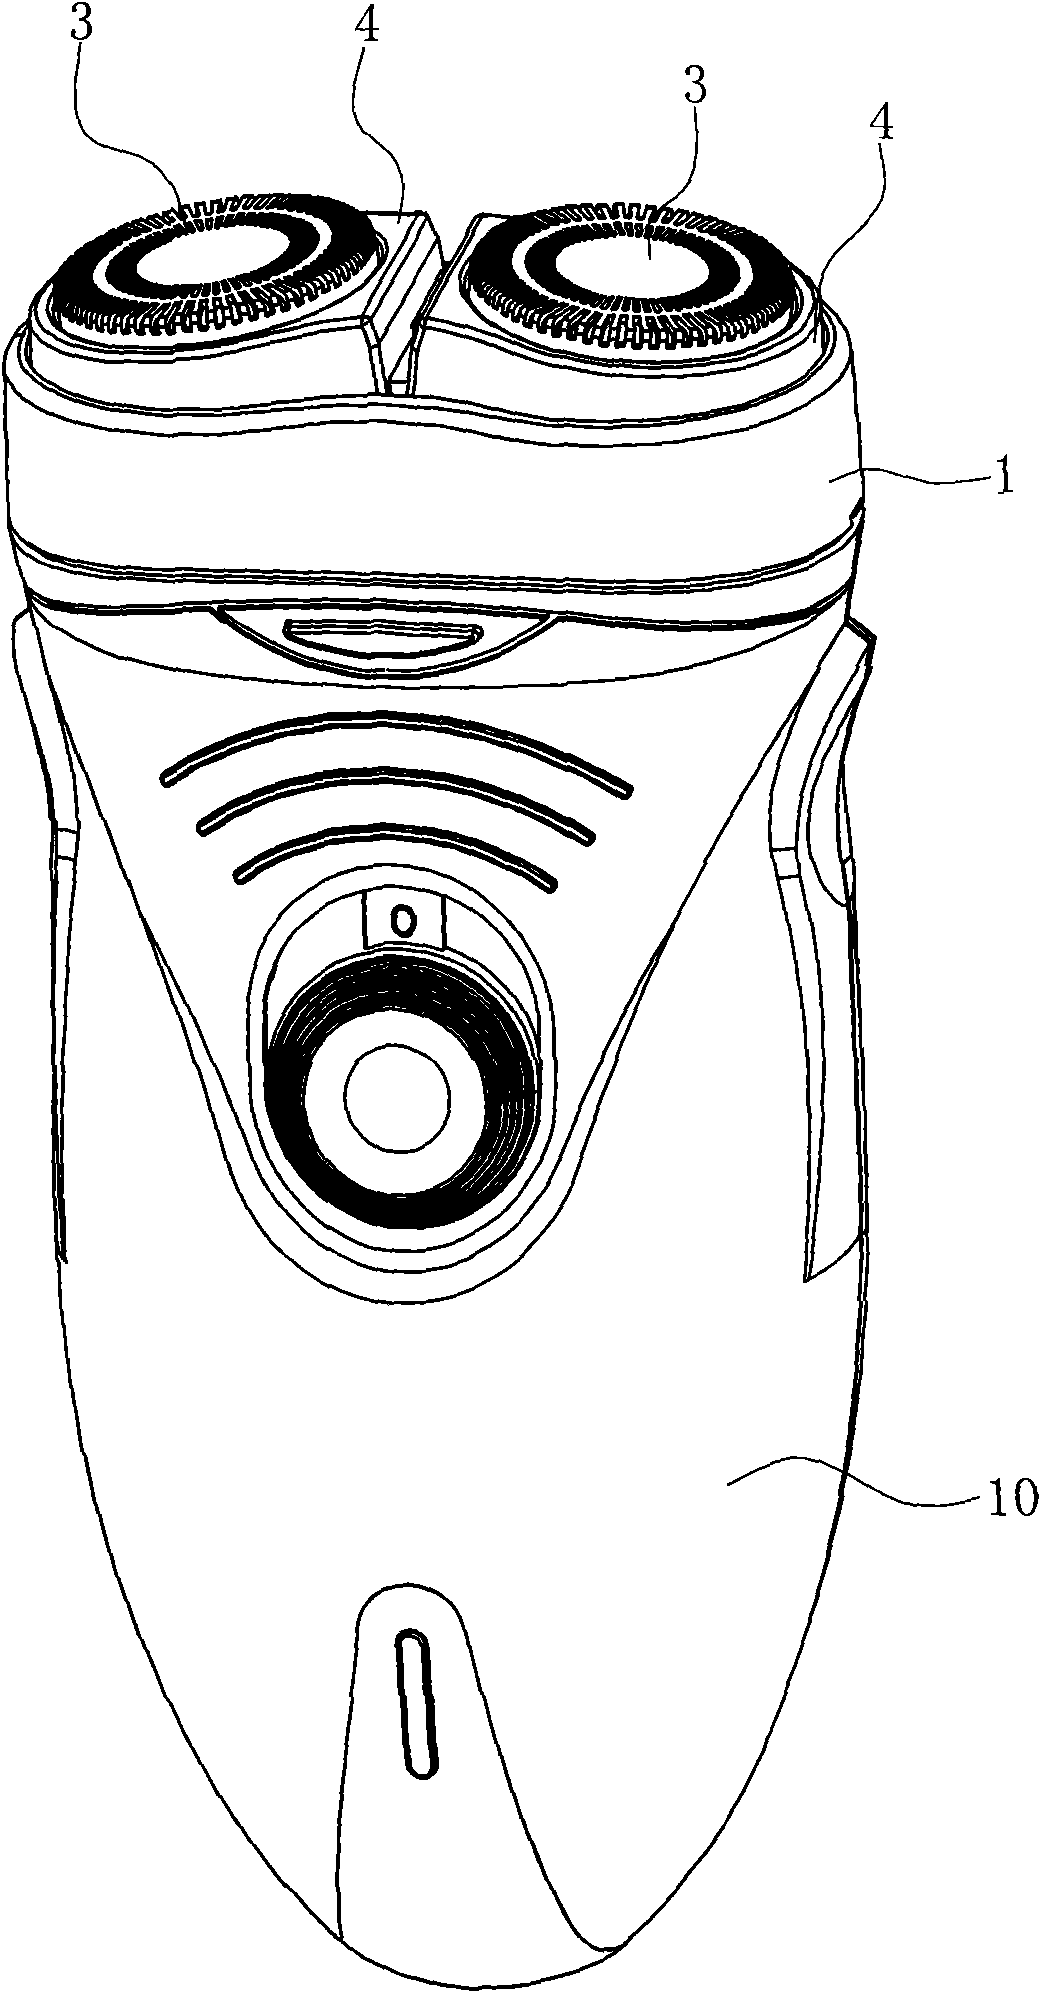 Floating structure of rotary type electric shaver